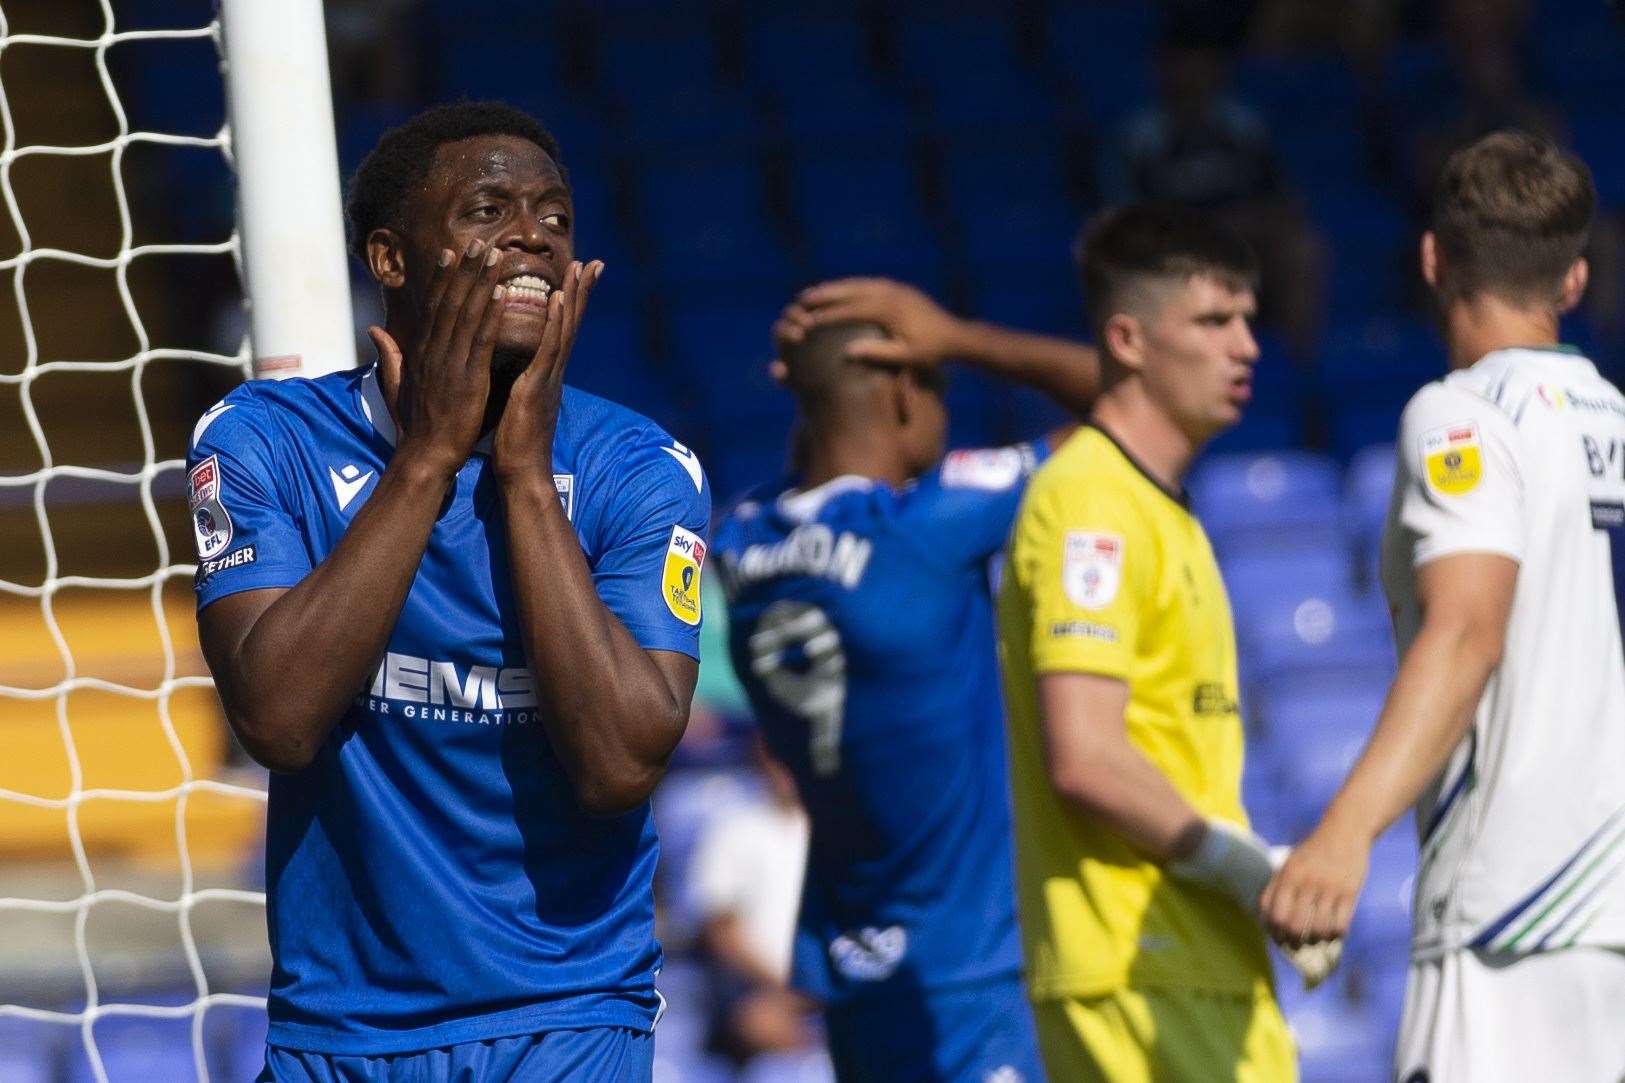 The first half of the season was tough for the Gills but they are now off the bottom of League 2